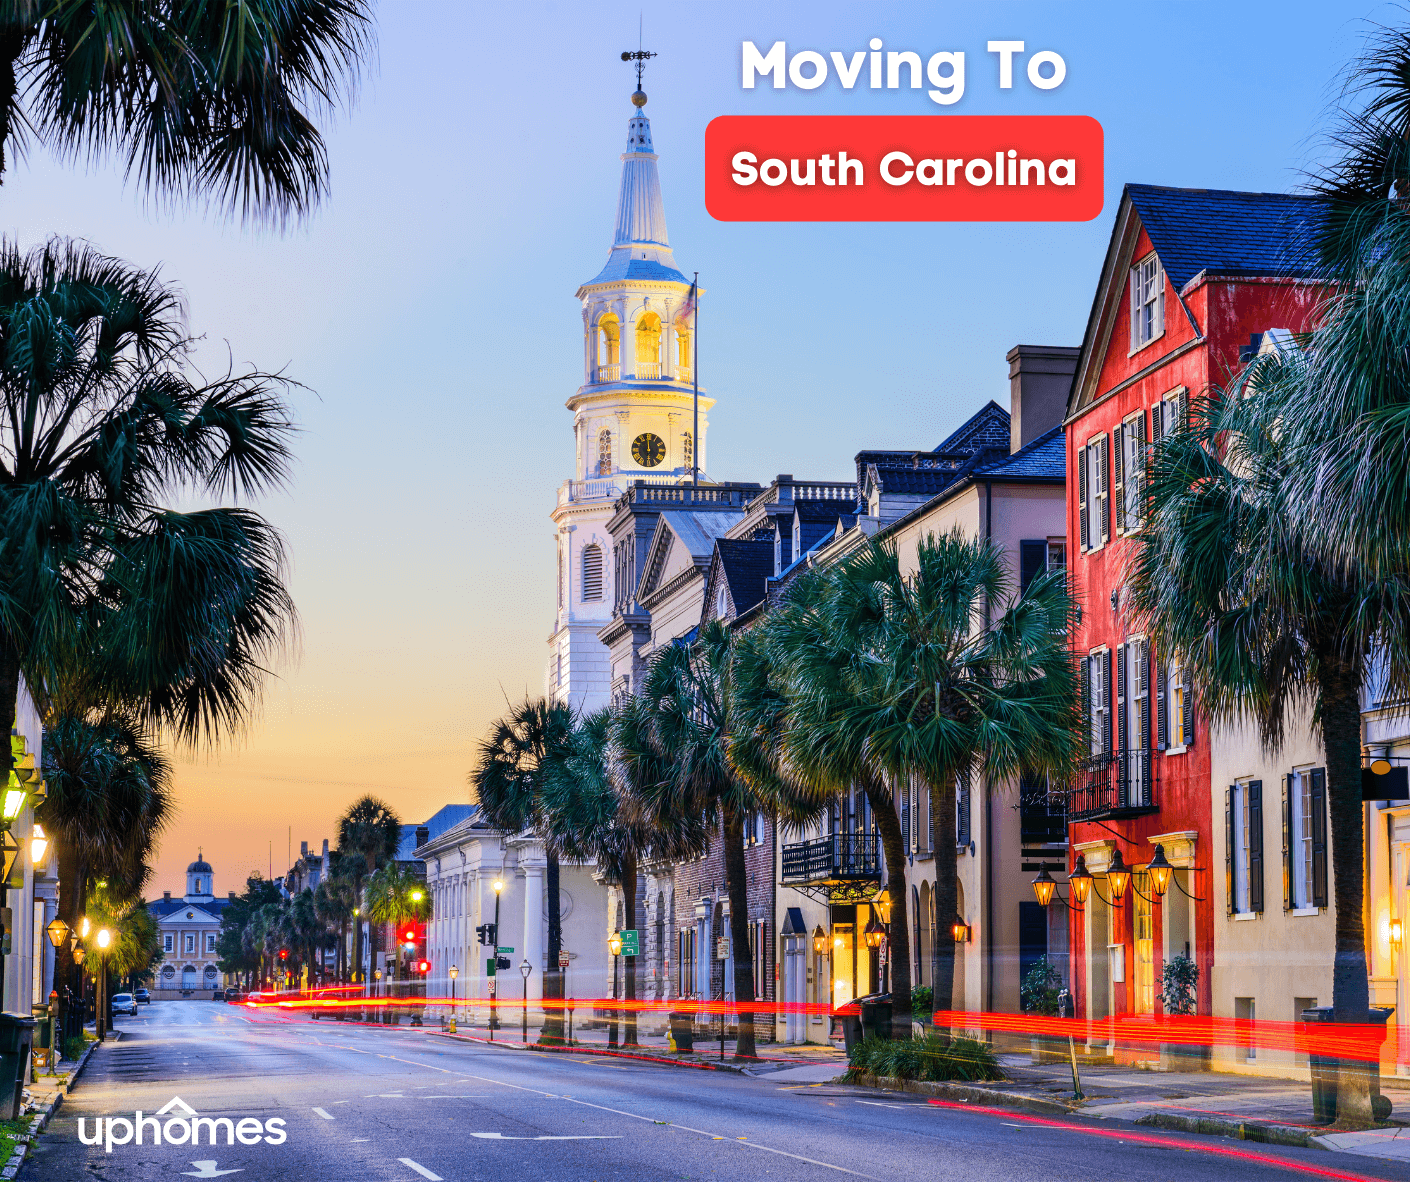 Moving to South Carolina - Pros and Cons of Living in South Carolina